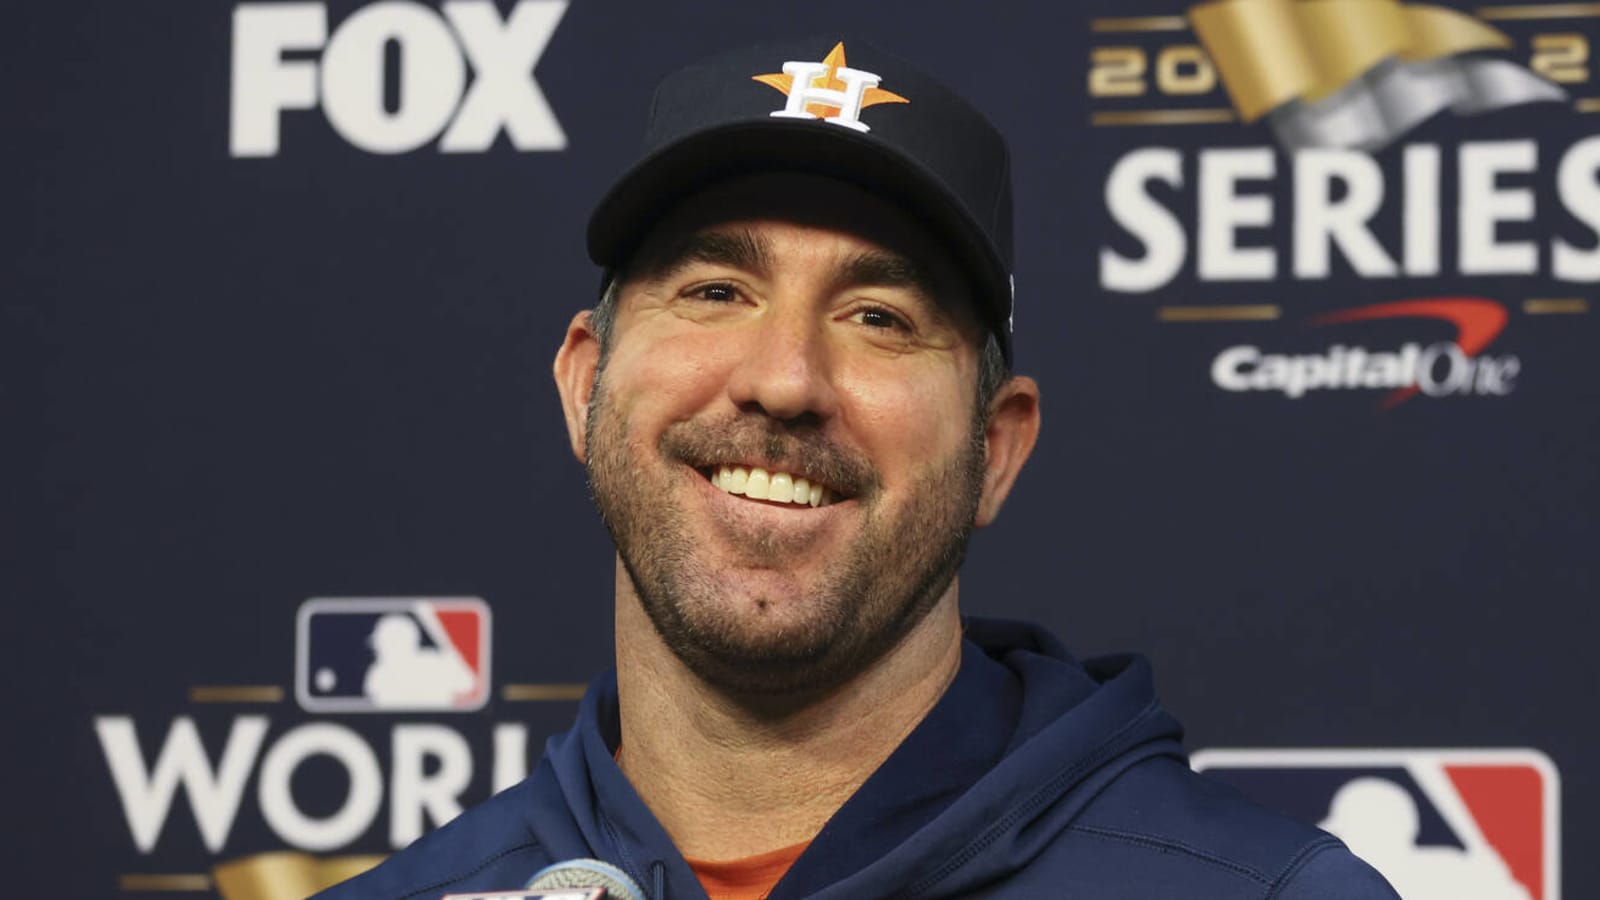 Justin Verlander has moment with Phillies fan who gave him middle finger